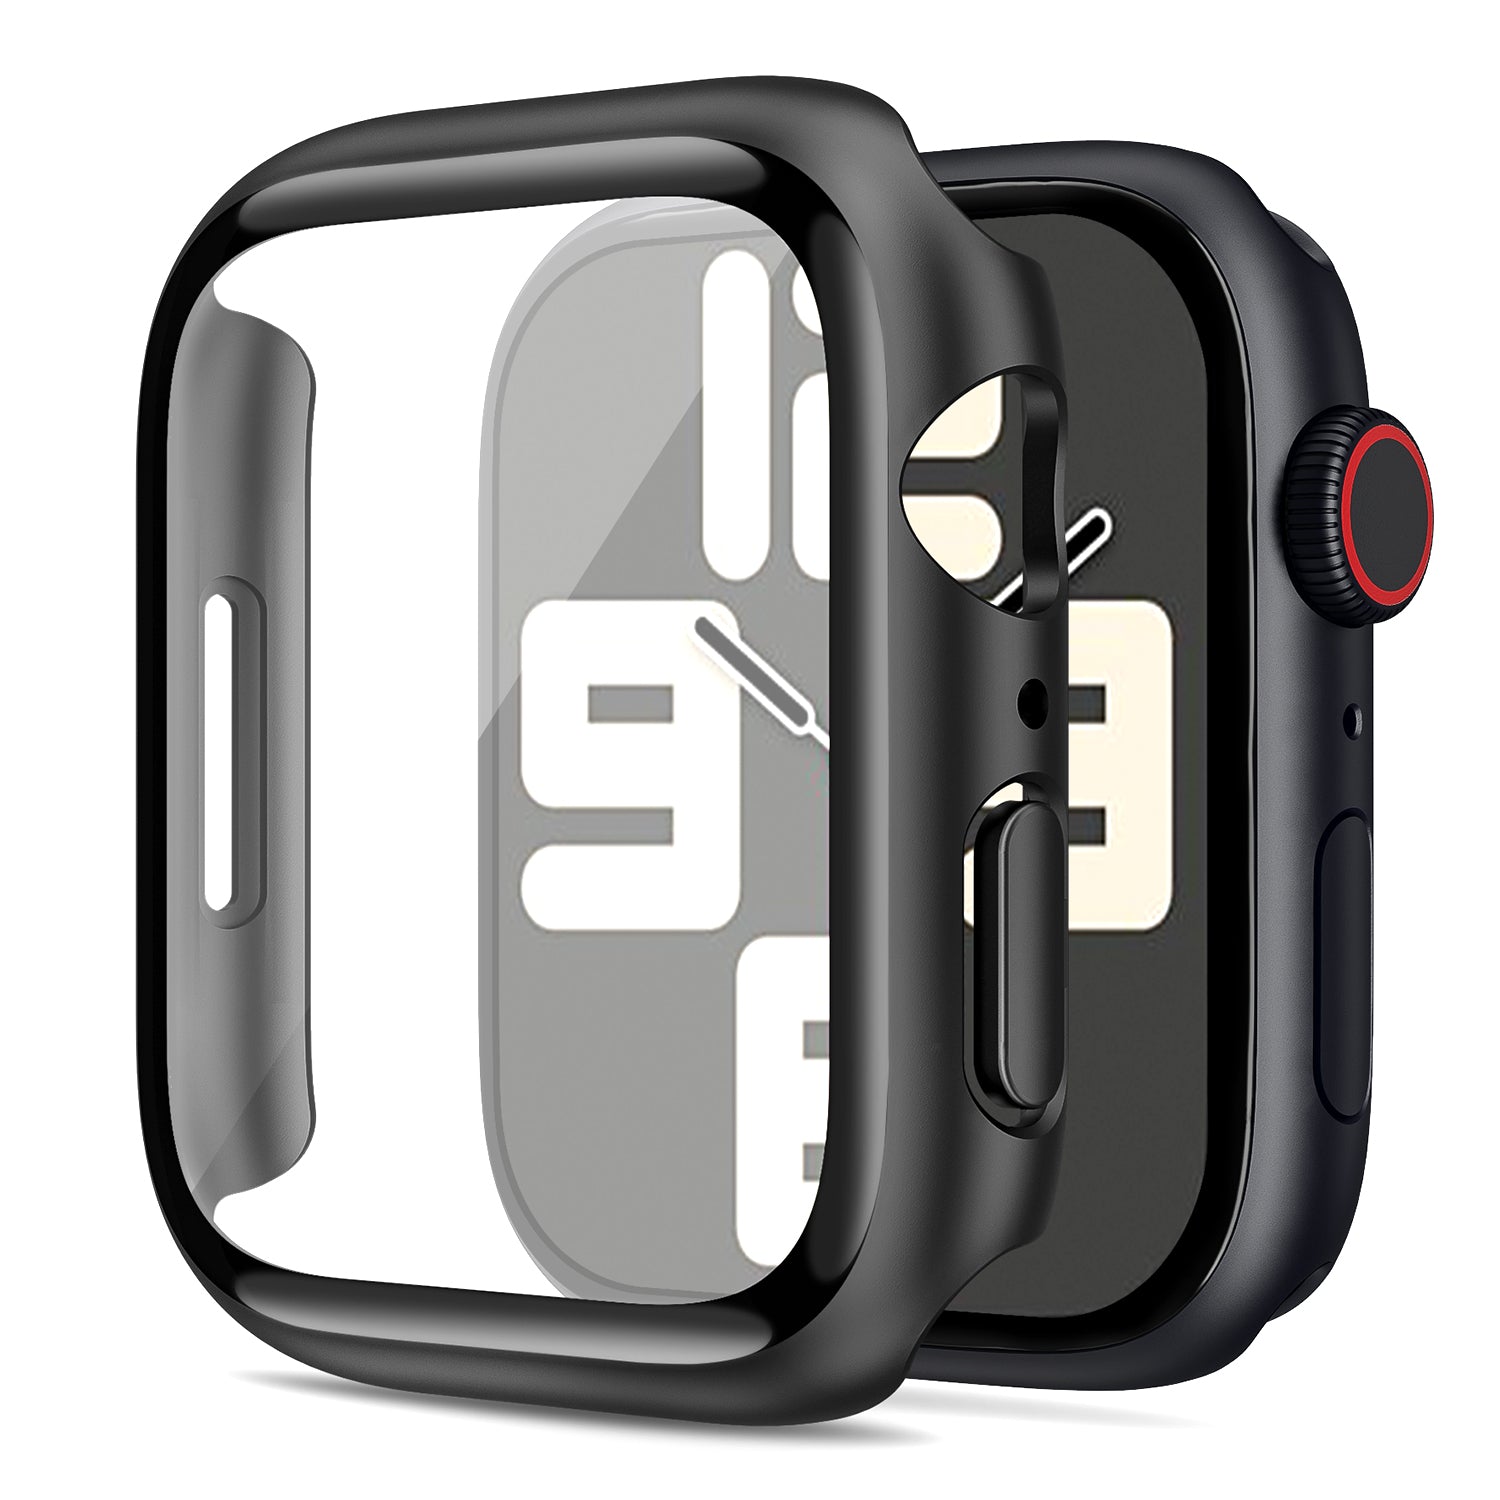 Tough On Apple Watch Case Series 6 / 5 / 4 / SE 44mm with Tempered Glass Screen Protector